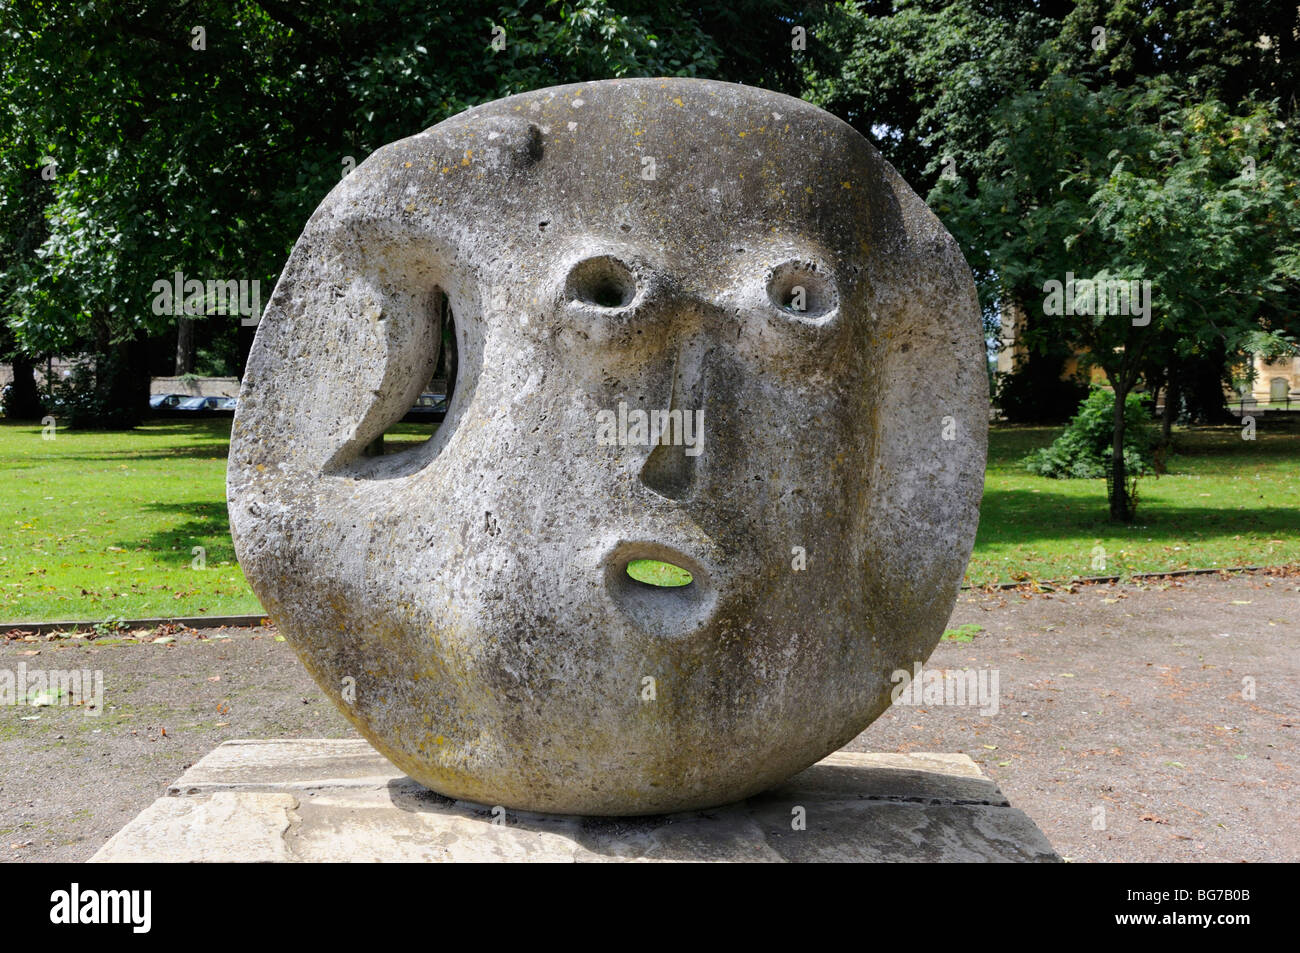 'Garden God' sculpture by Peter Inchbald outside St Andrew's Church, Pershore, Worcestershire, England, UK. Stock Photo